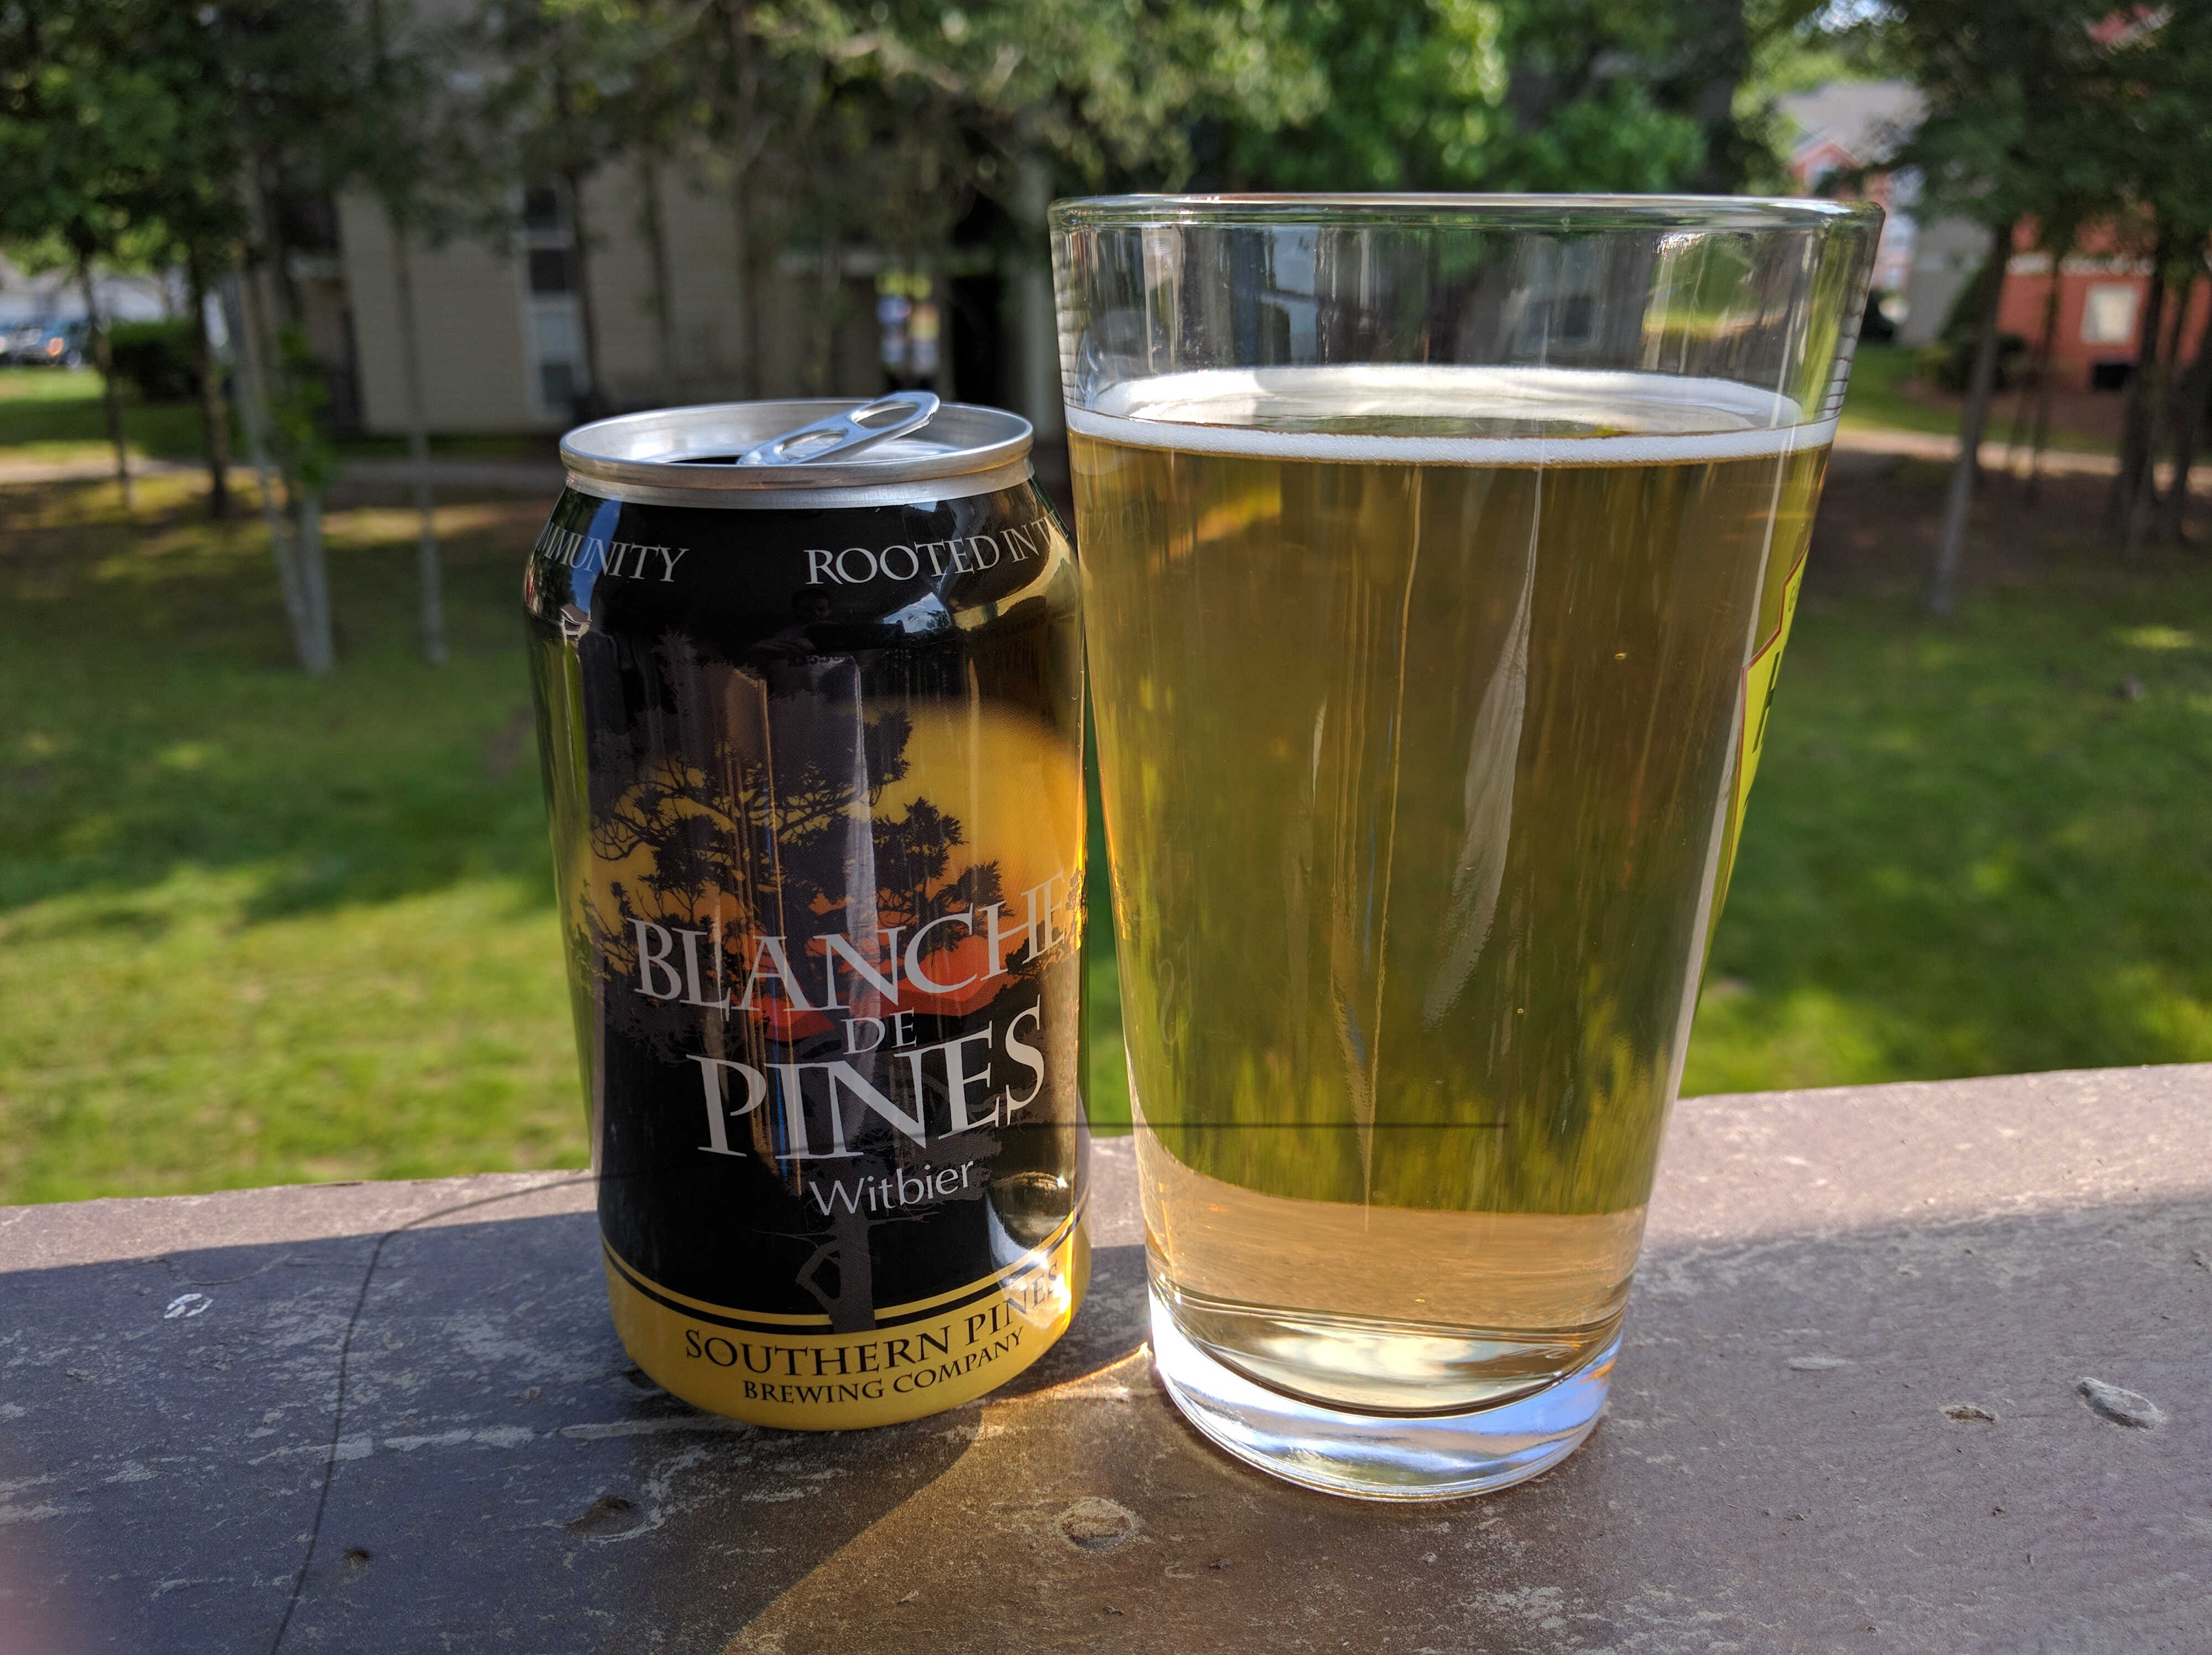 Southern Pines Brewing Company | Blanche de Pines